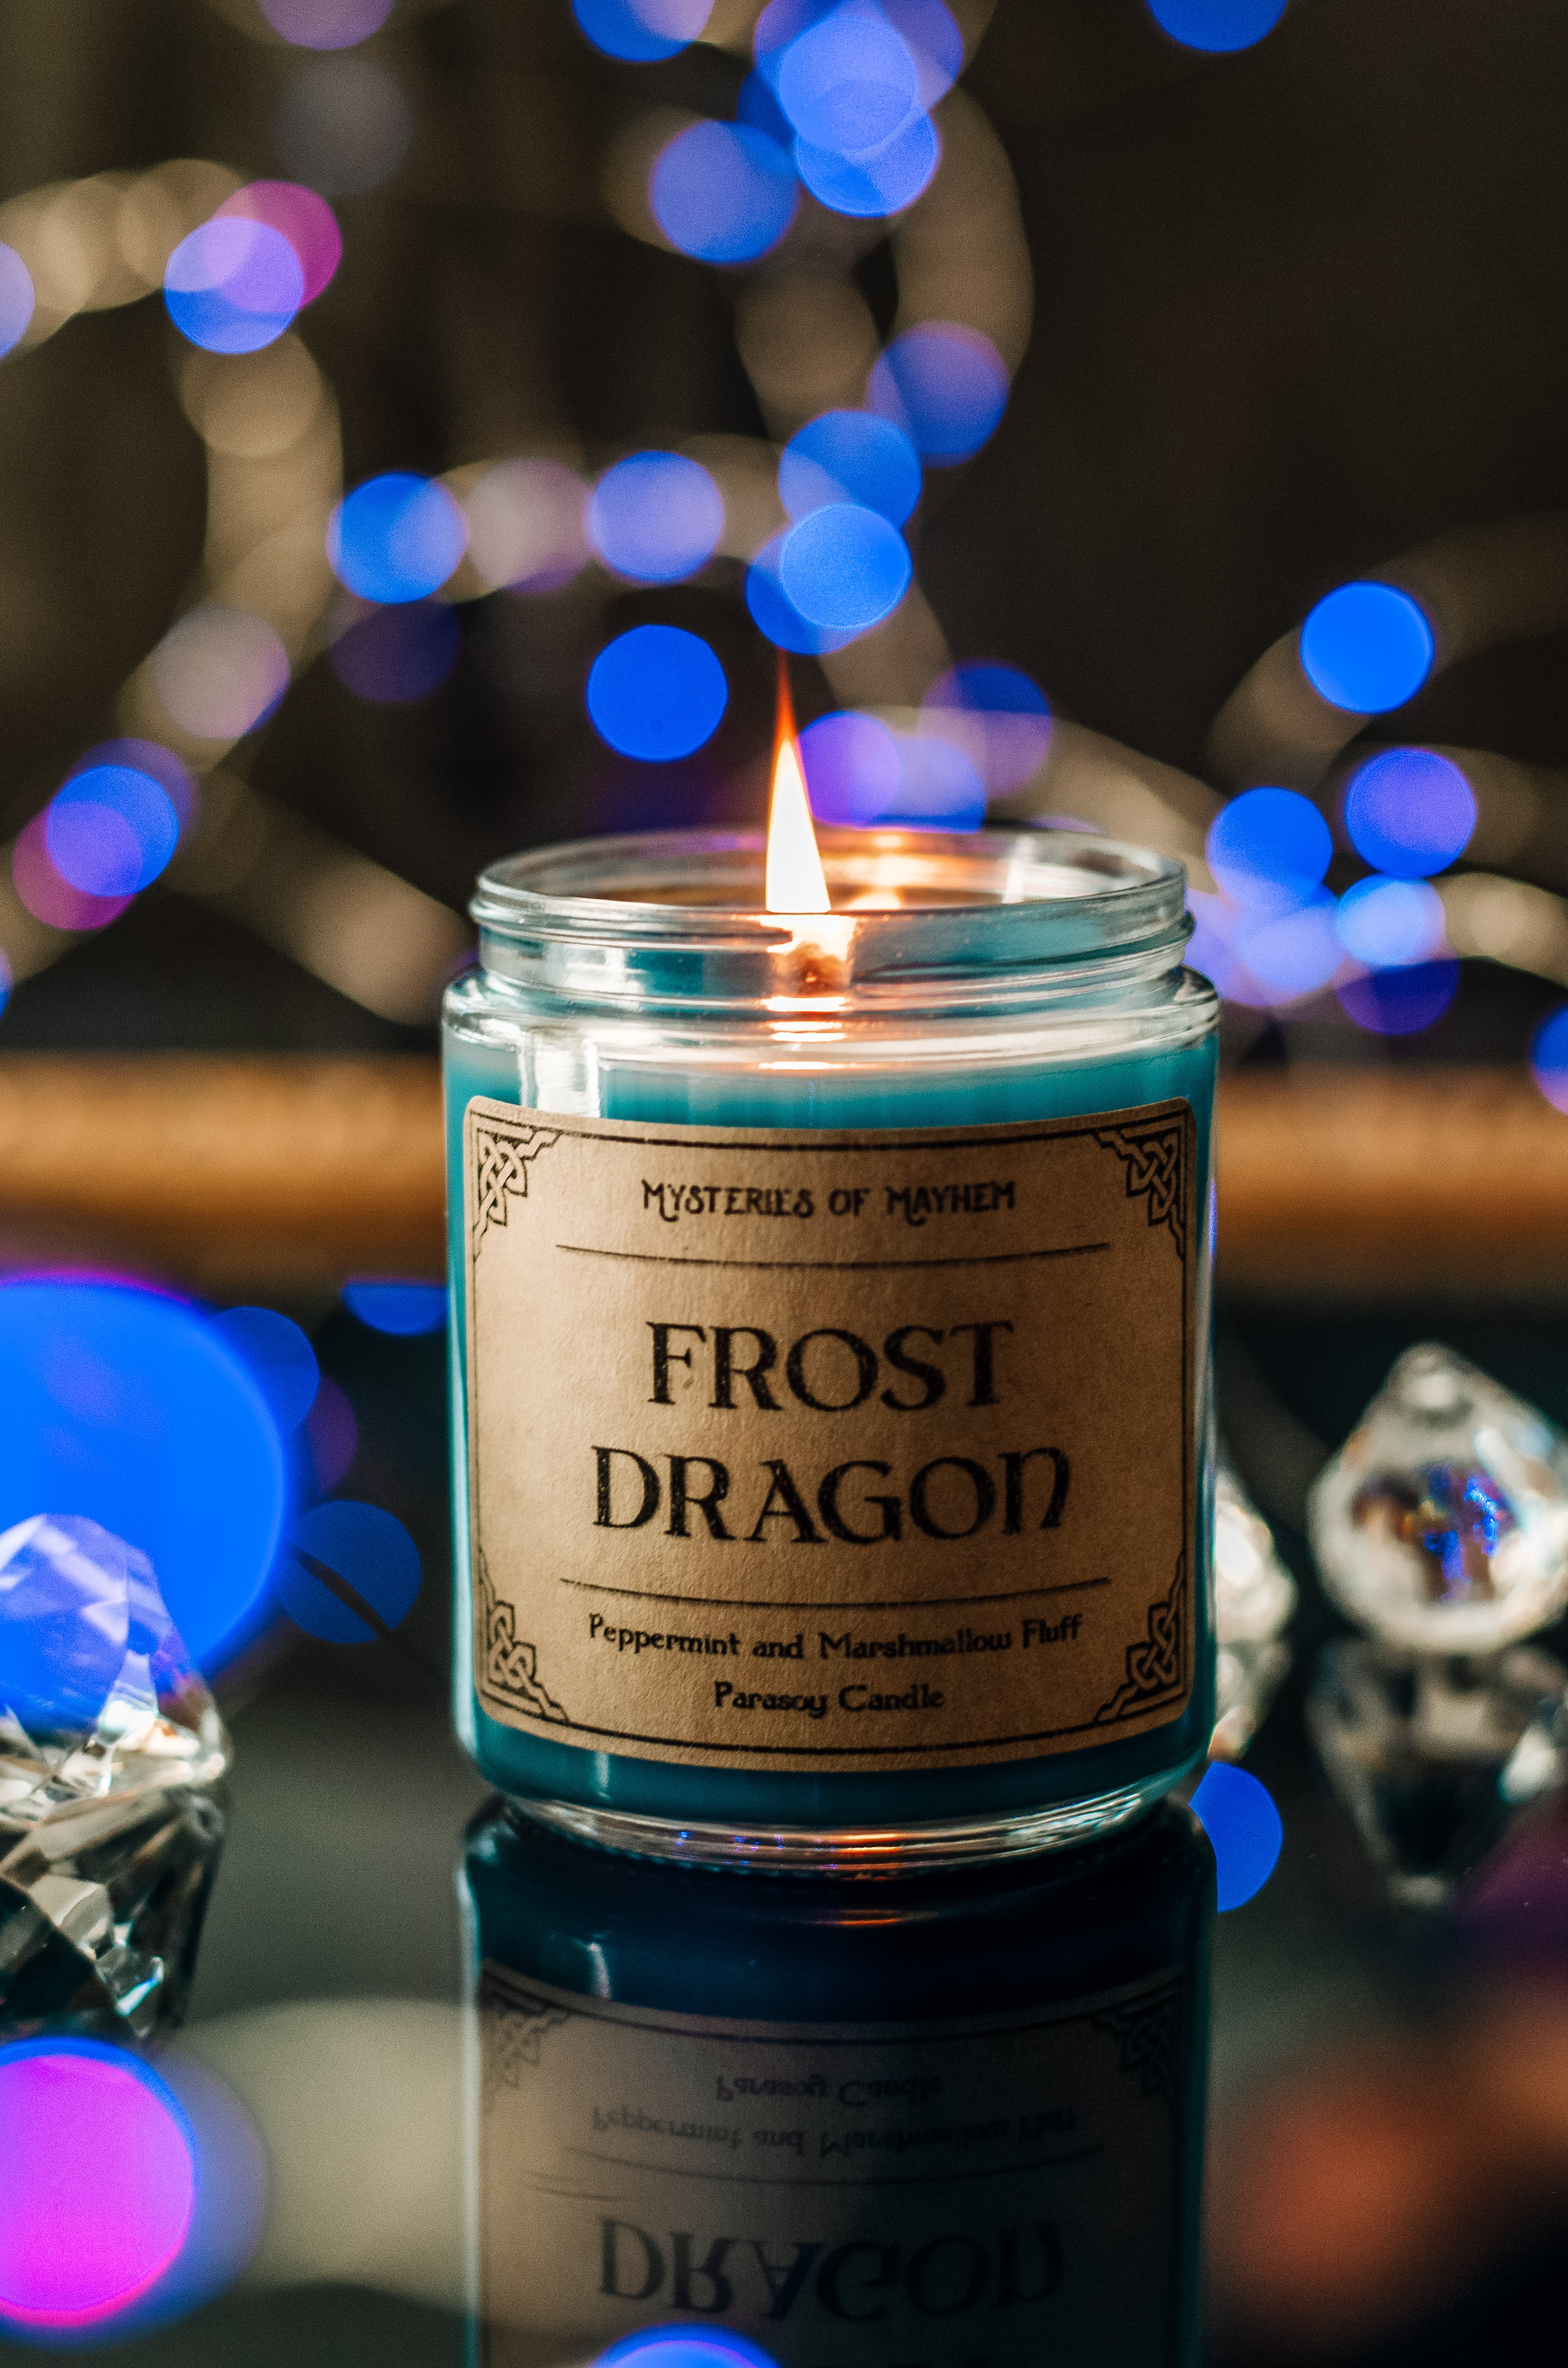 Frost Dragon - Peppermint and Marshmallow Fluff Scented, Winter Scent